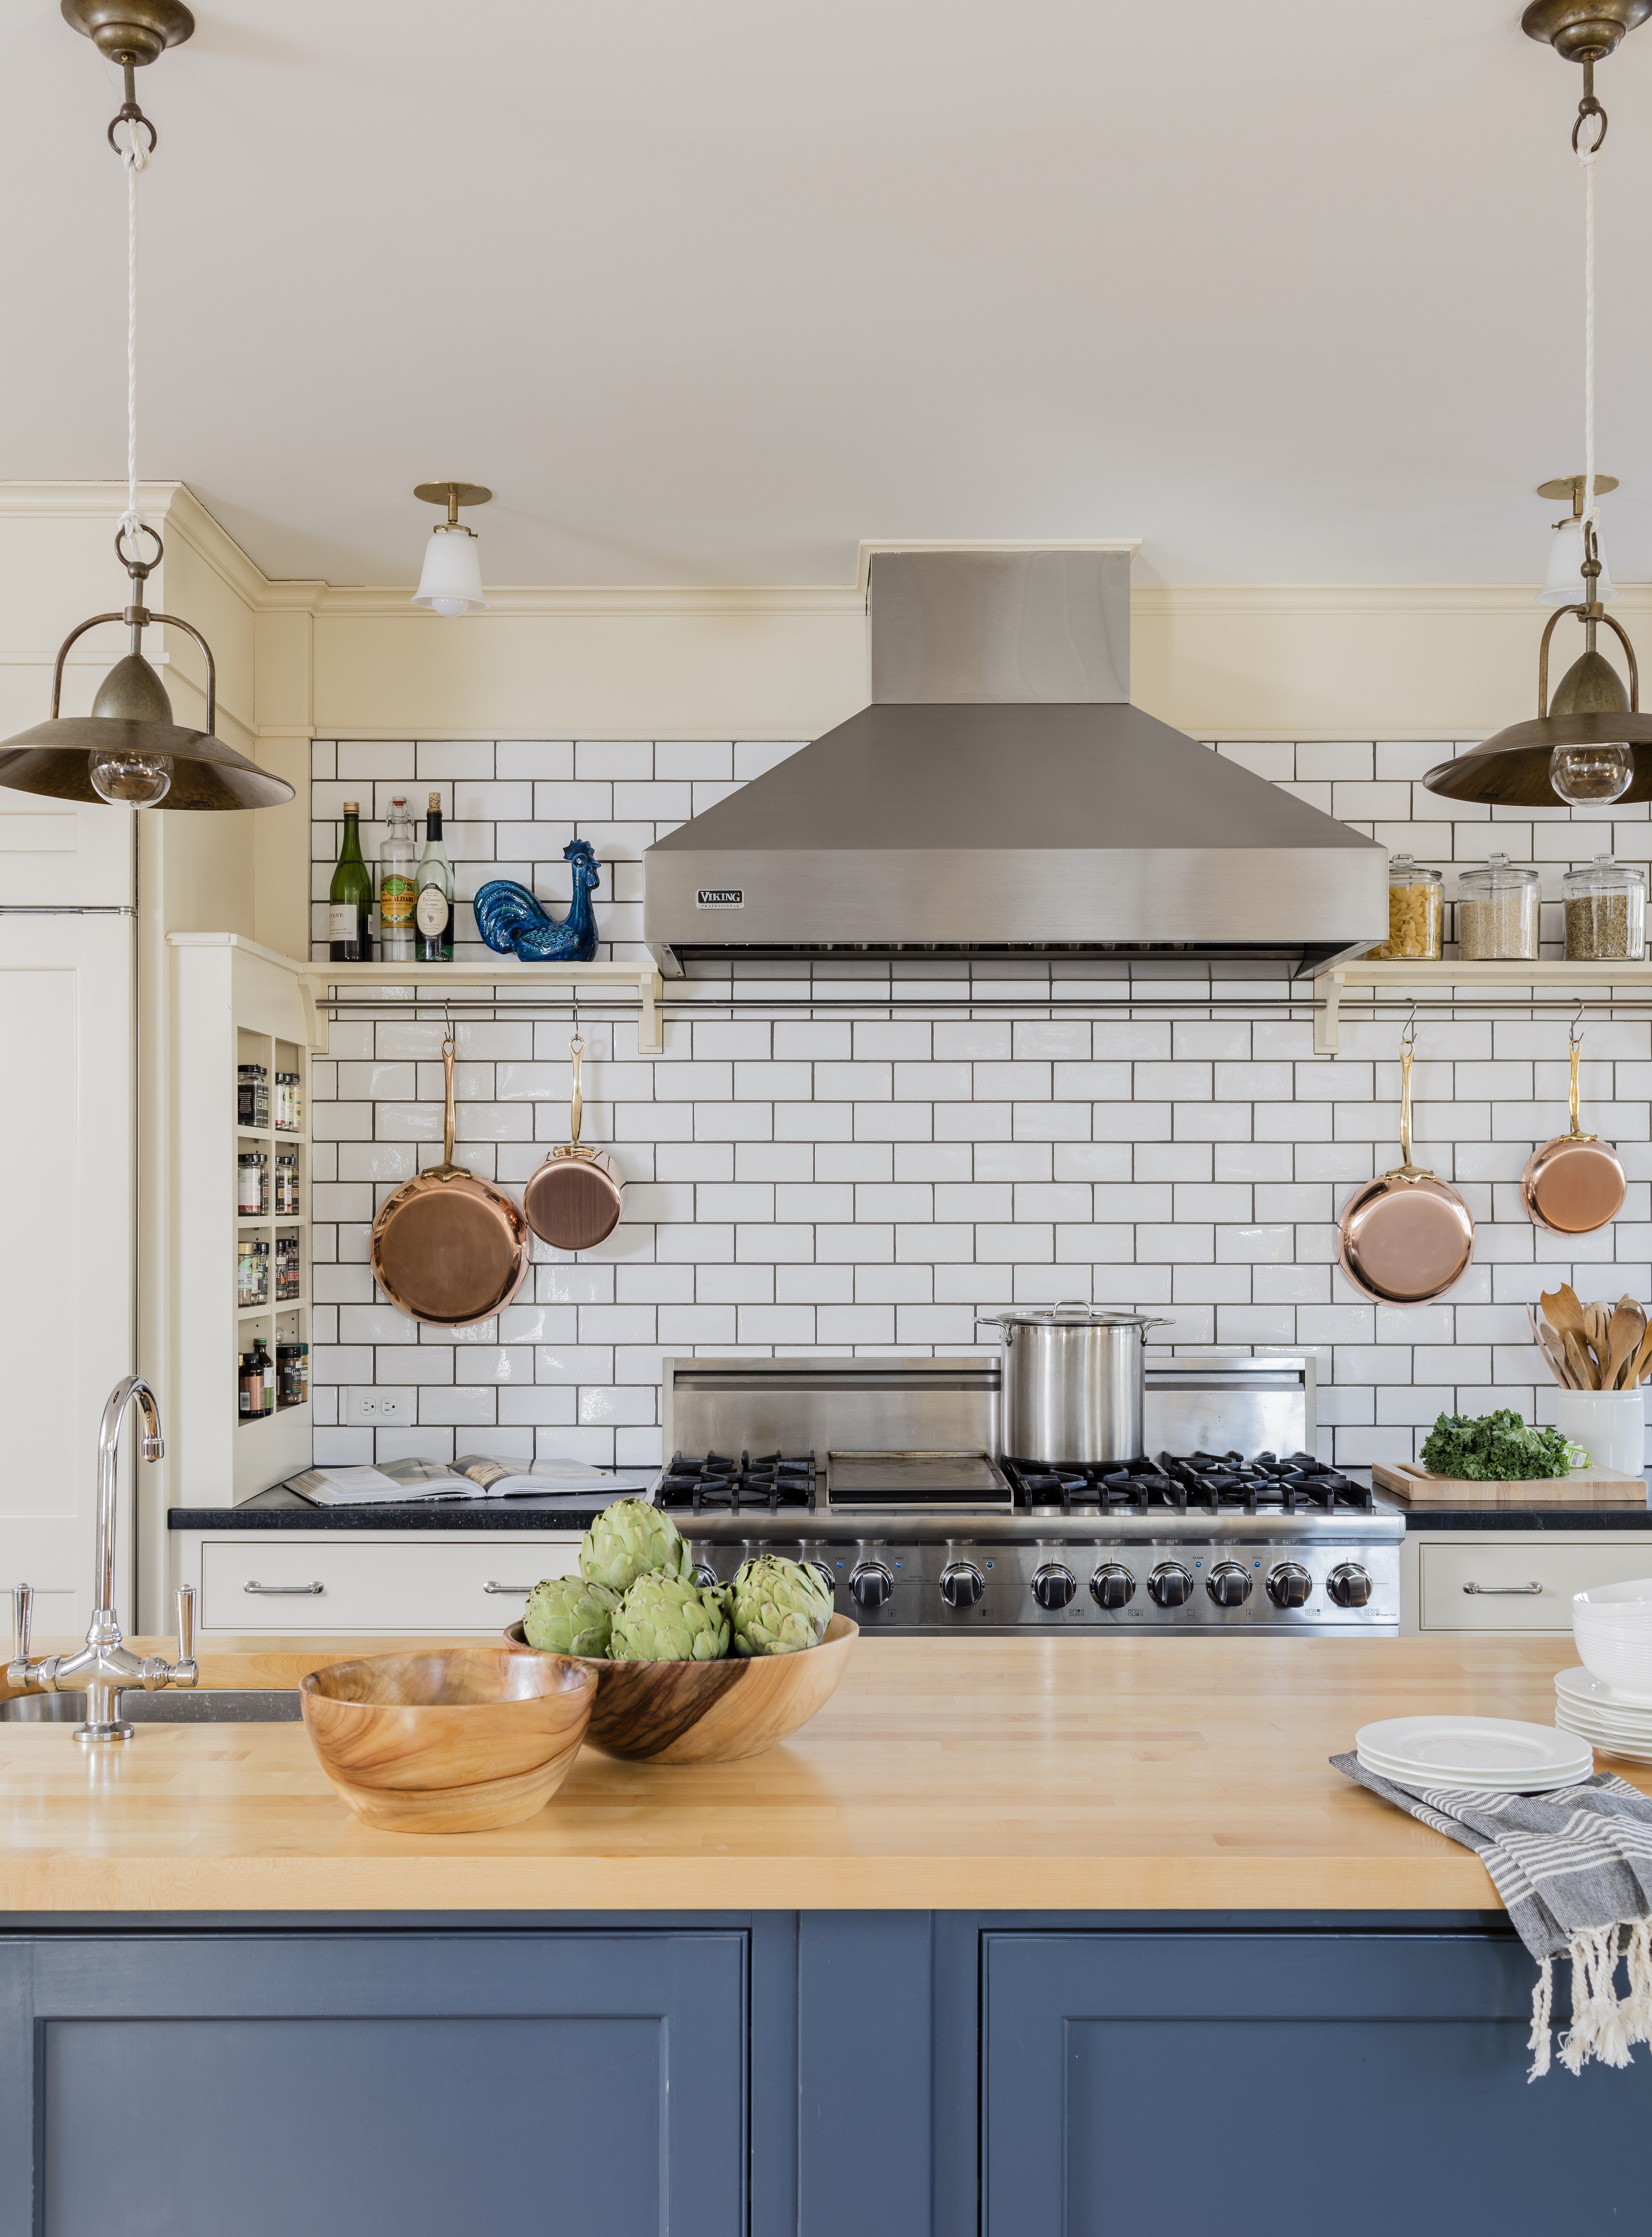 33 Subway Tile Backsplashes Stylish Subway Tile Ideas For Kitchens,Best Places To Travel In December 2020 In The Us